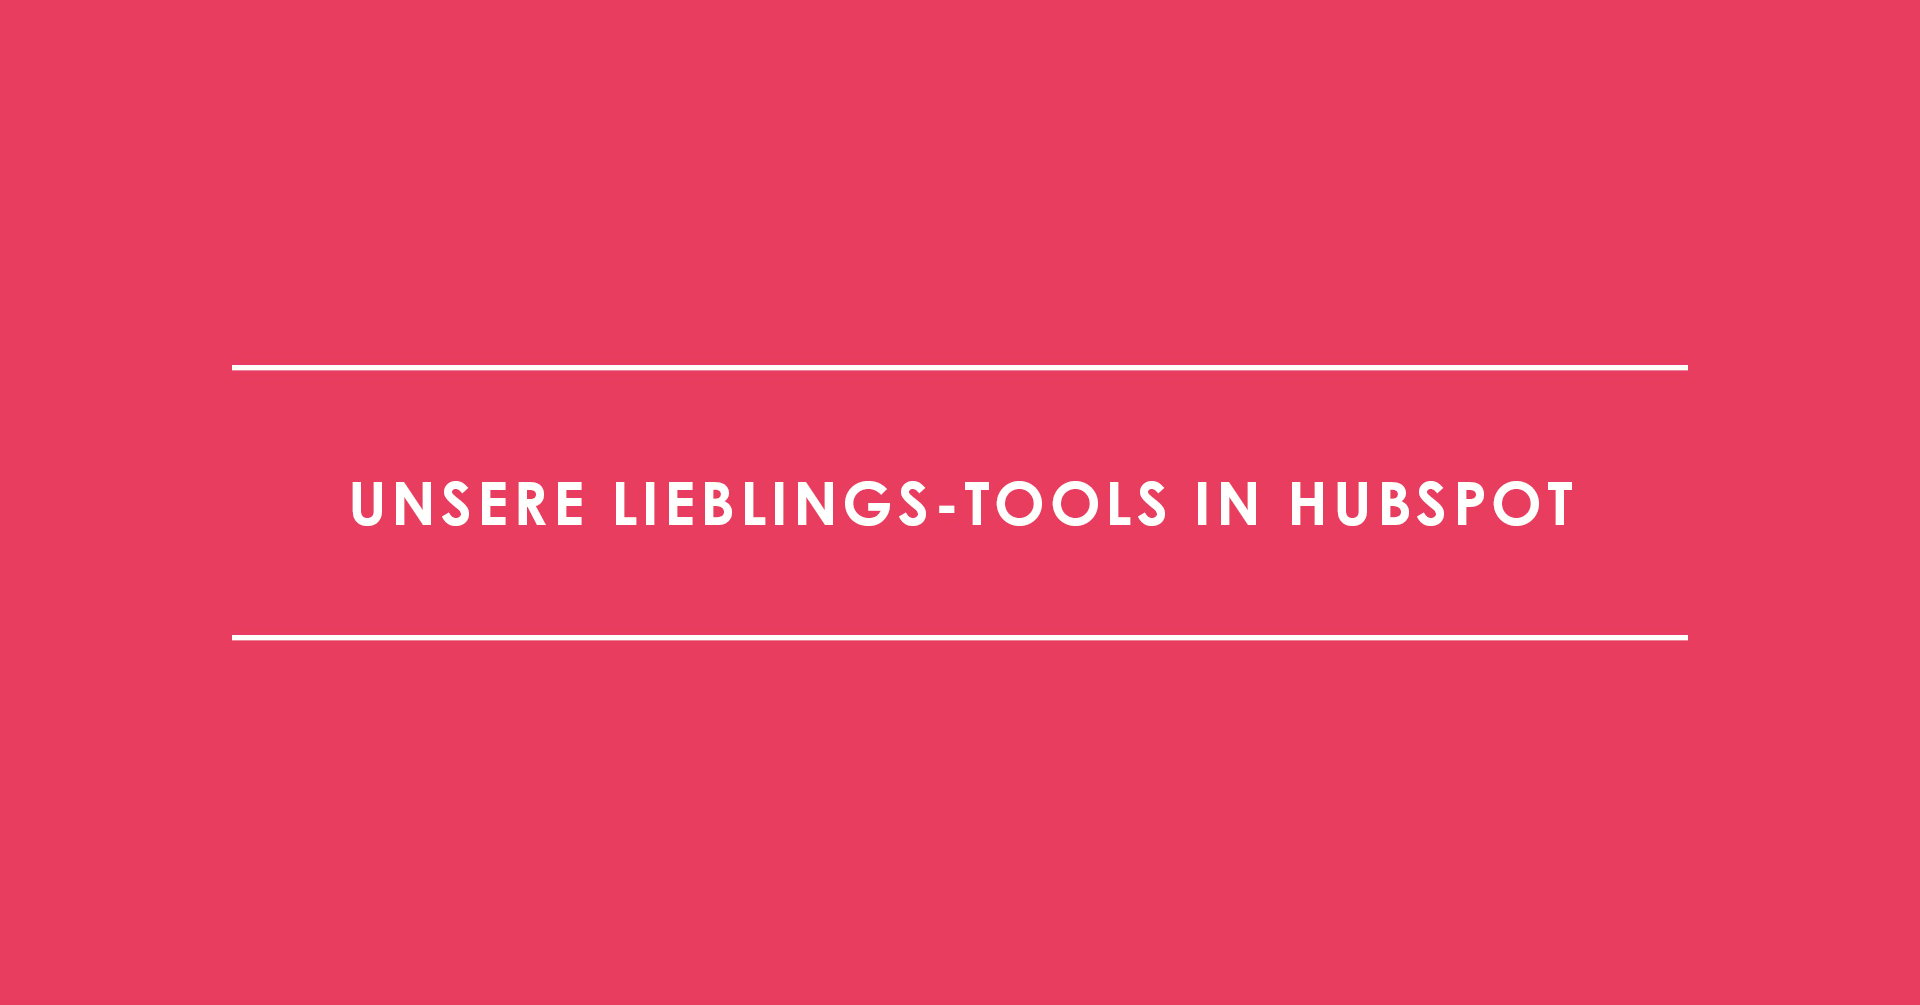 Unsere Lieblings-Tools in HubSpot